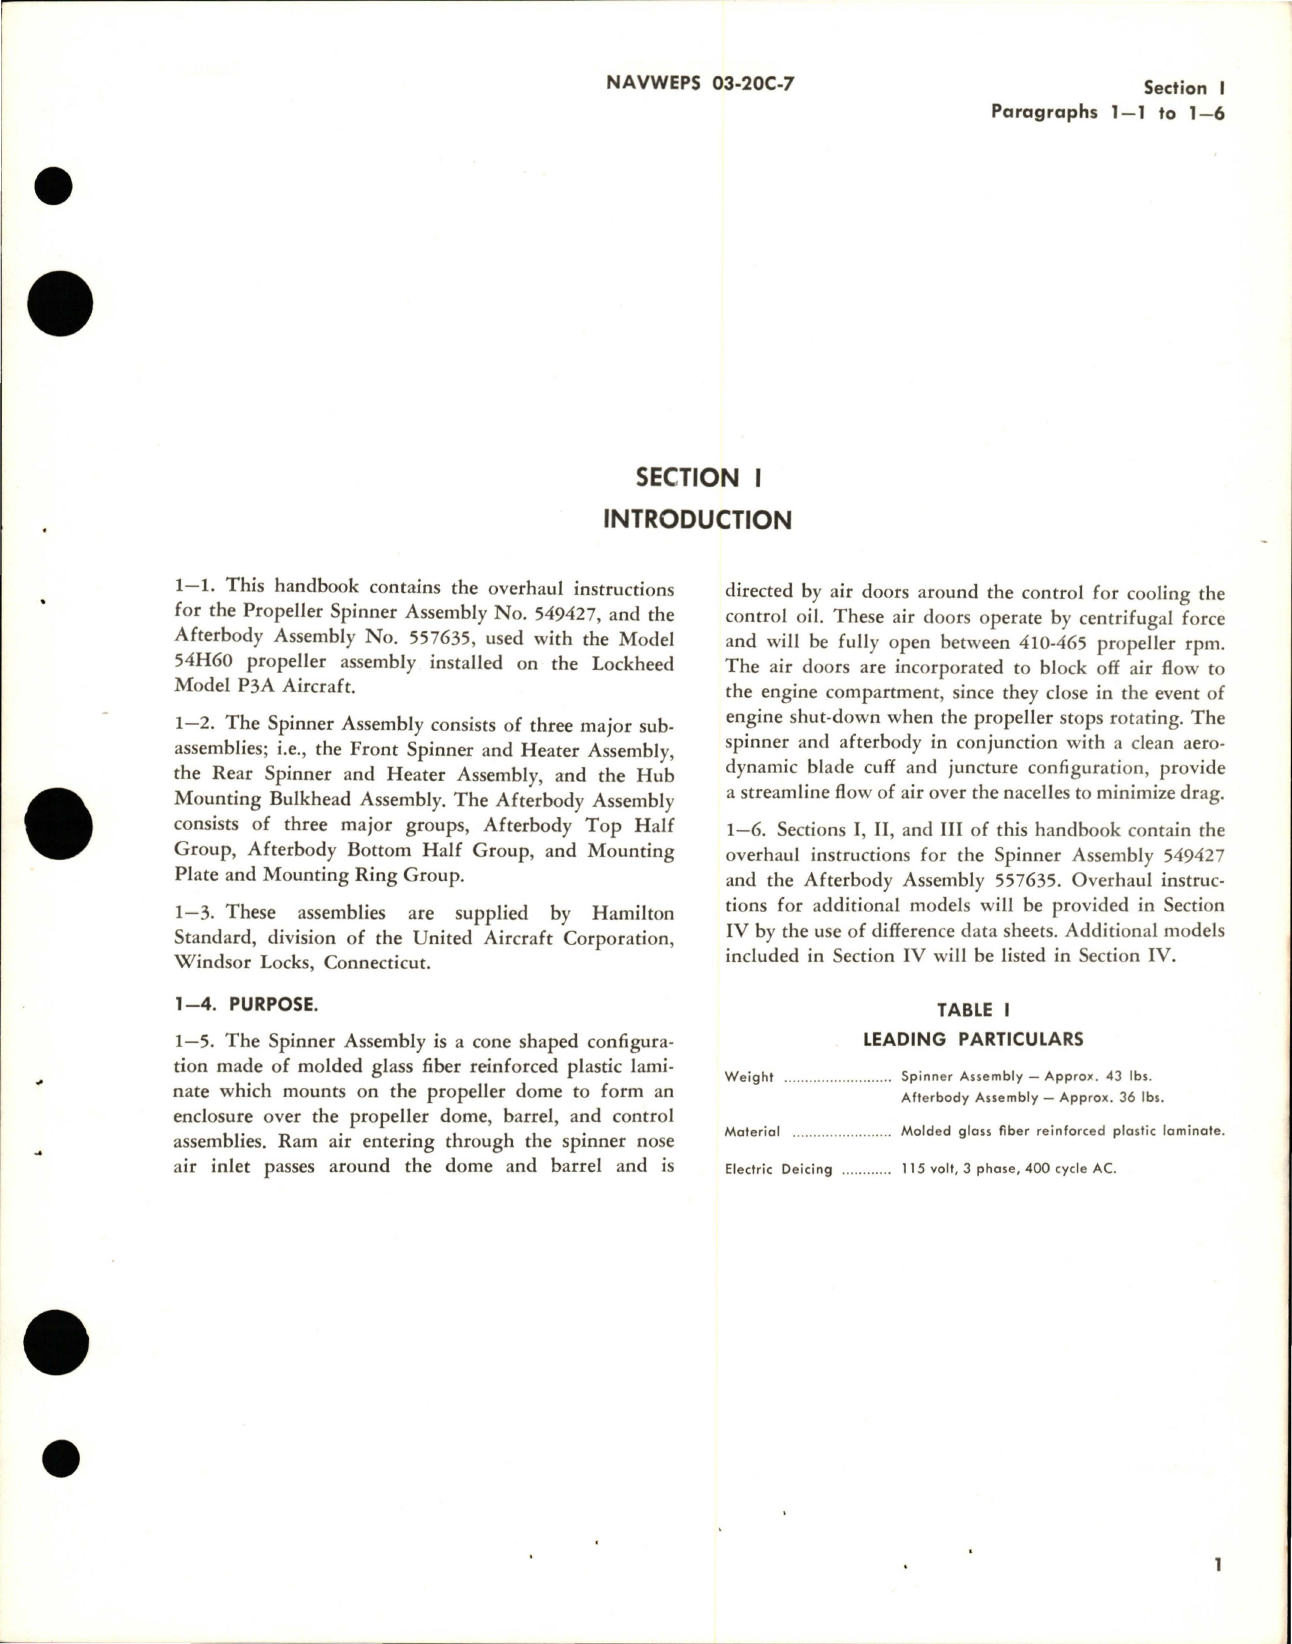 Sample page 5 from AirCorps Library document: Overhaul Instructions for Aircraft Propeller Spinner and Anti-Icing - Spinner Assembly 549427 -  Afterbody Assembly 557635